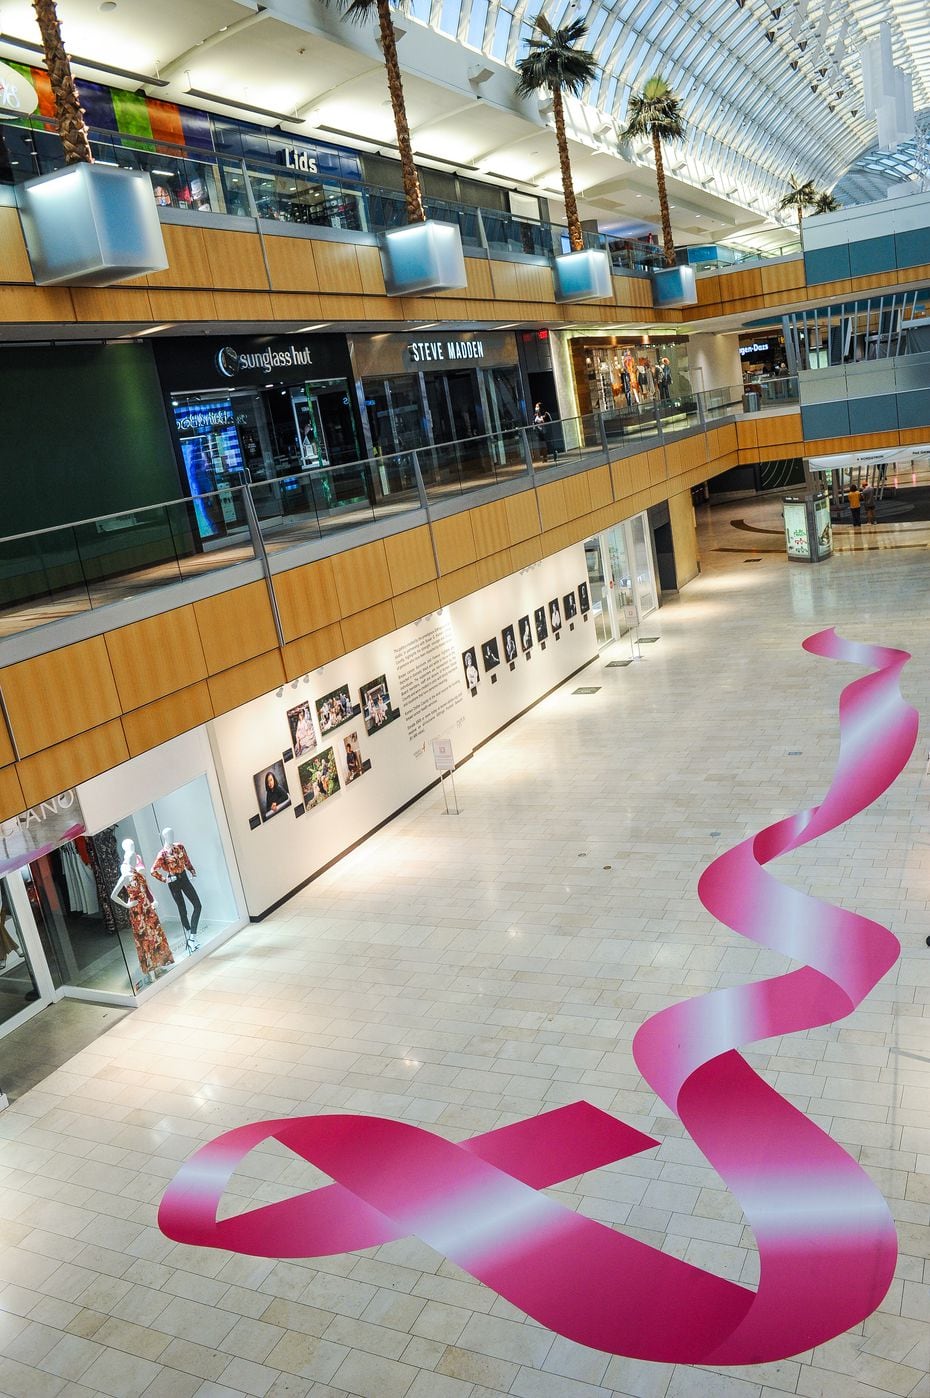 A Gittings/Susan G. Komen Dallas County portrait wall at Galleria Dallas is easy to find...